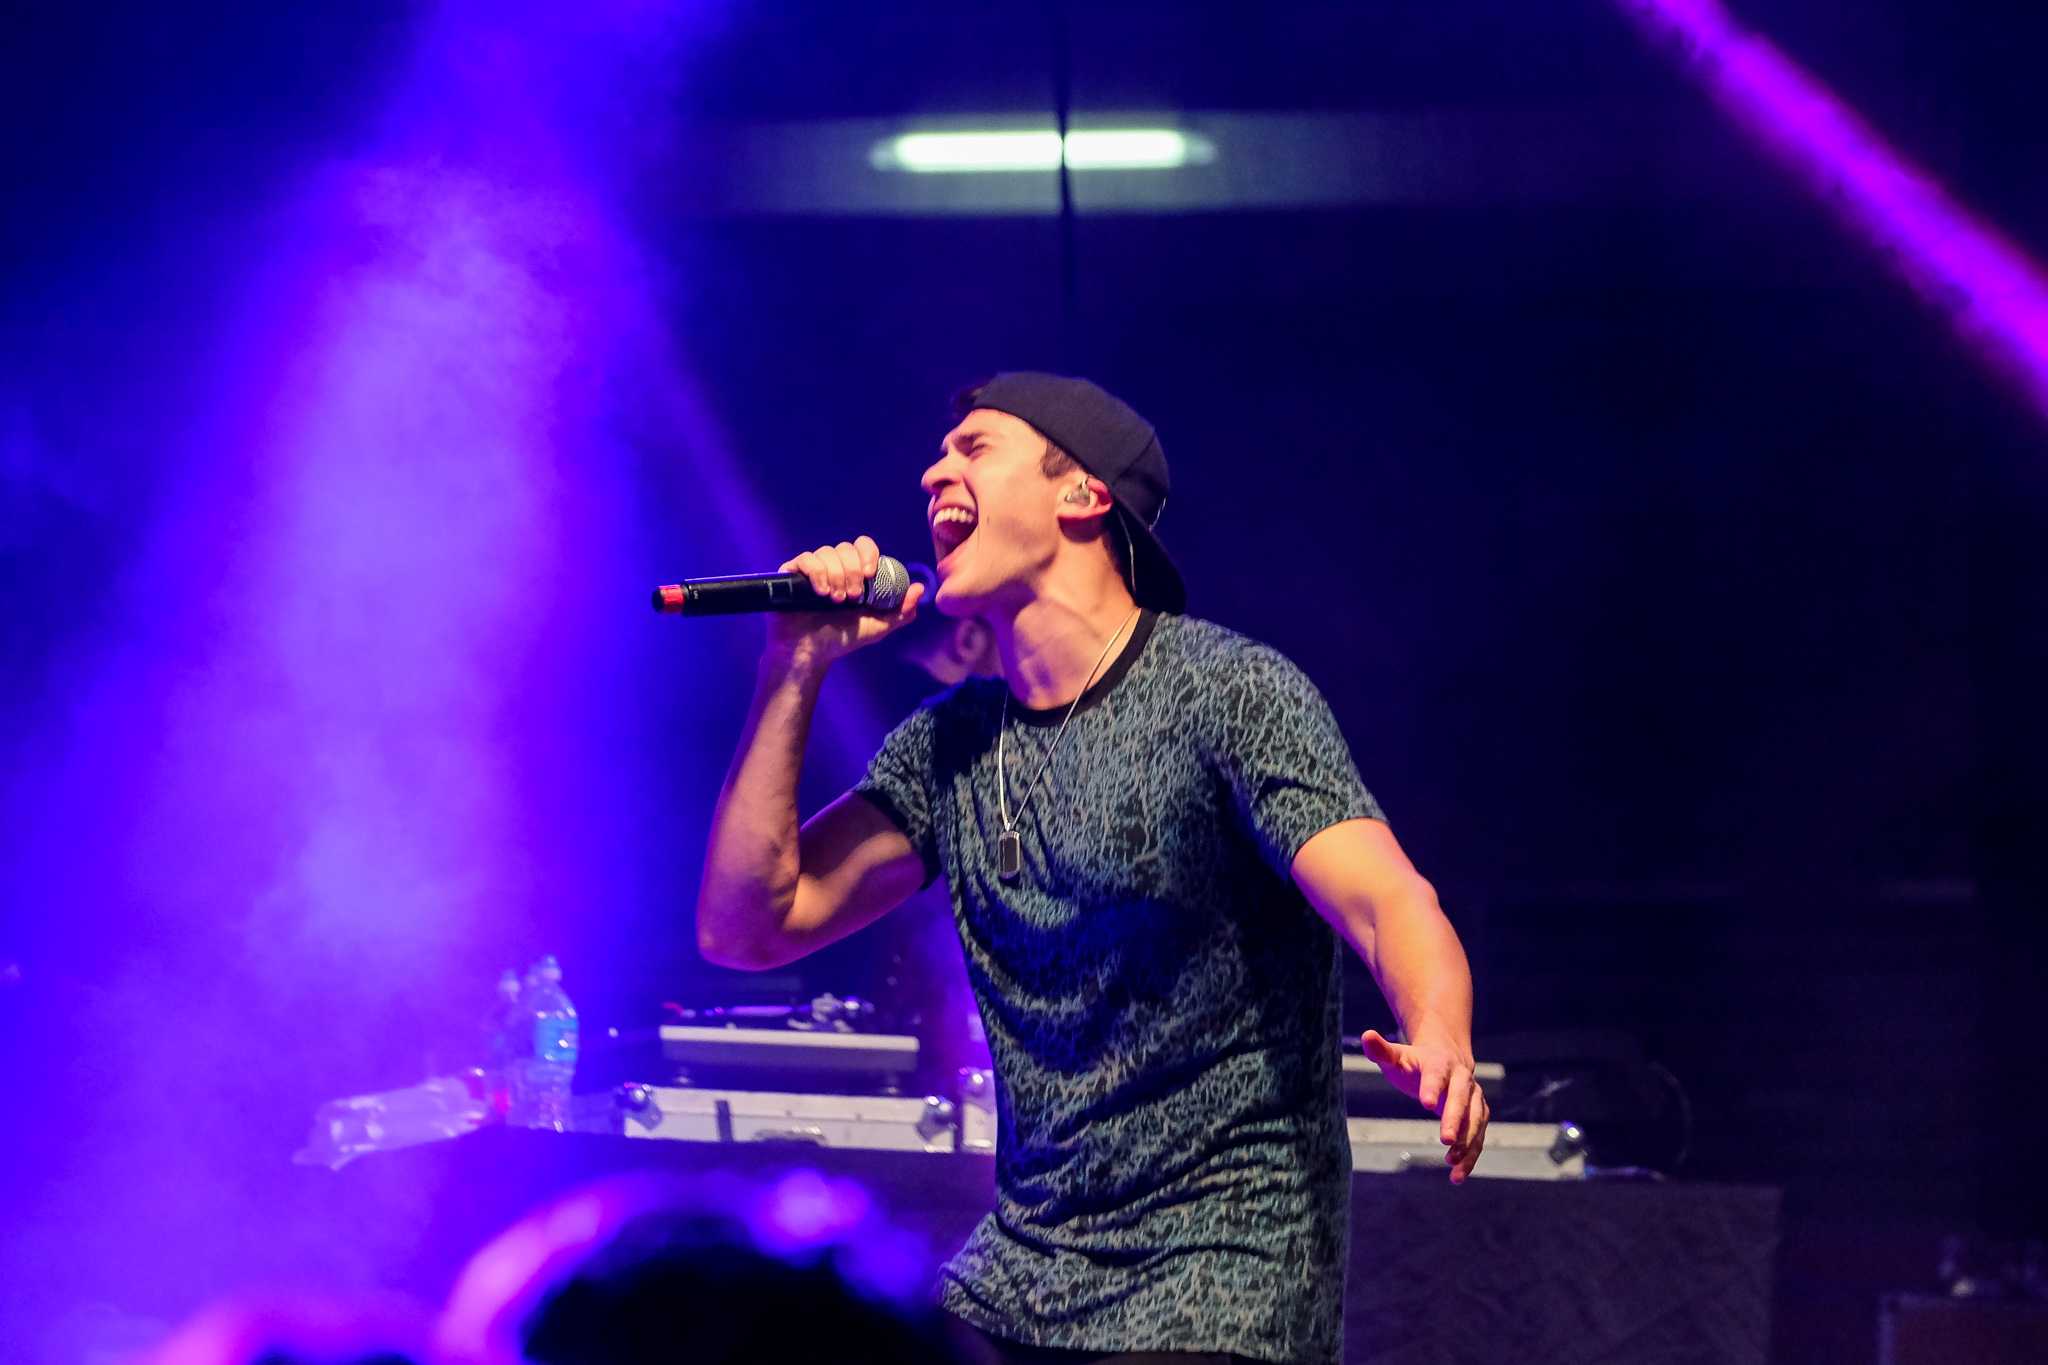 Cal Shapiro of Timeflies performs on stage at the west lawn by the FAU Stadium on Oct. 30. Mohammed F Emran | Asst. Creative Director